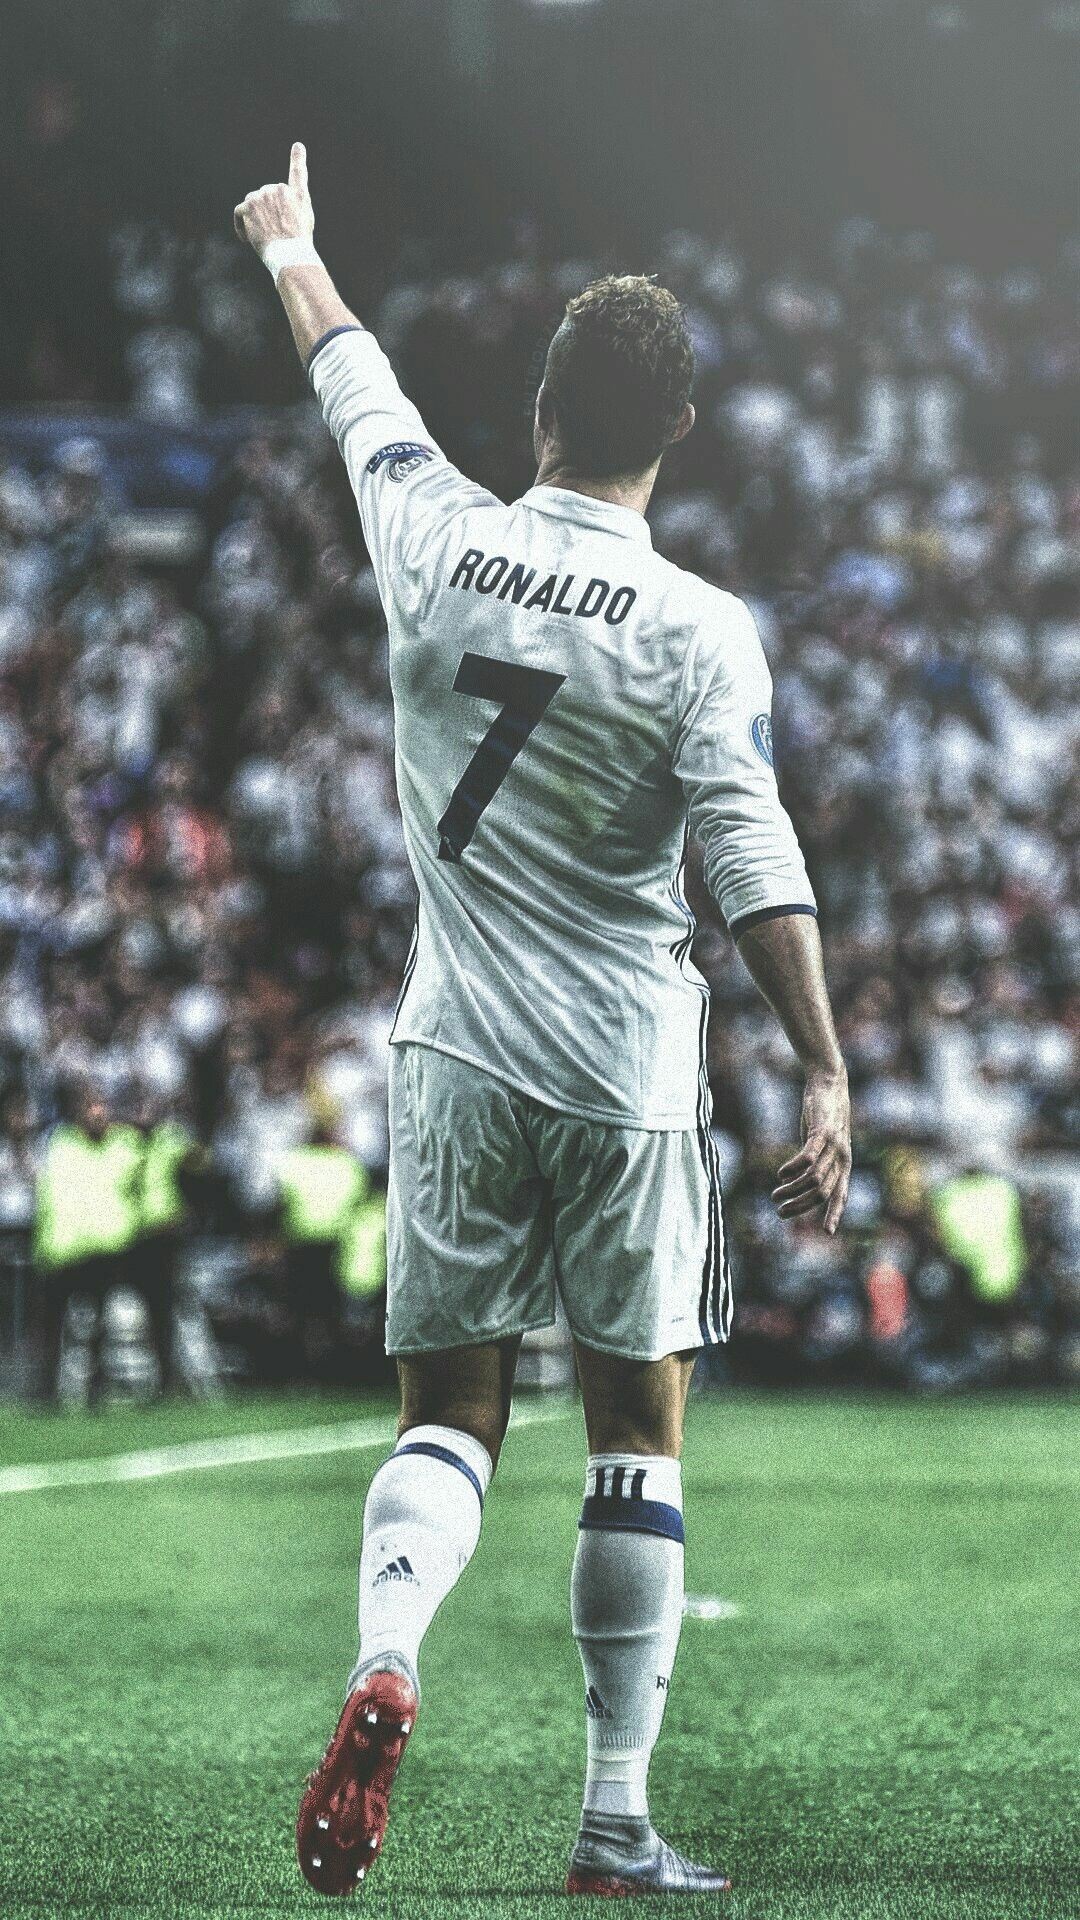 Cristiano Ronaldo: CR7, The third person to earn a lifetime contract from the sportswear company Nike. 1080x1920 Full HD Background.